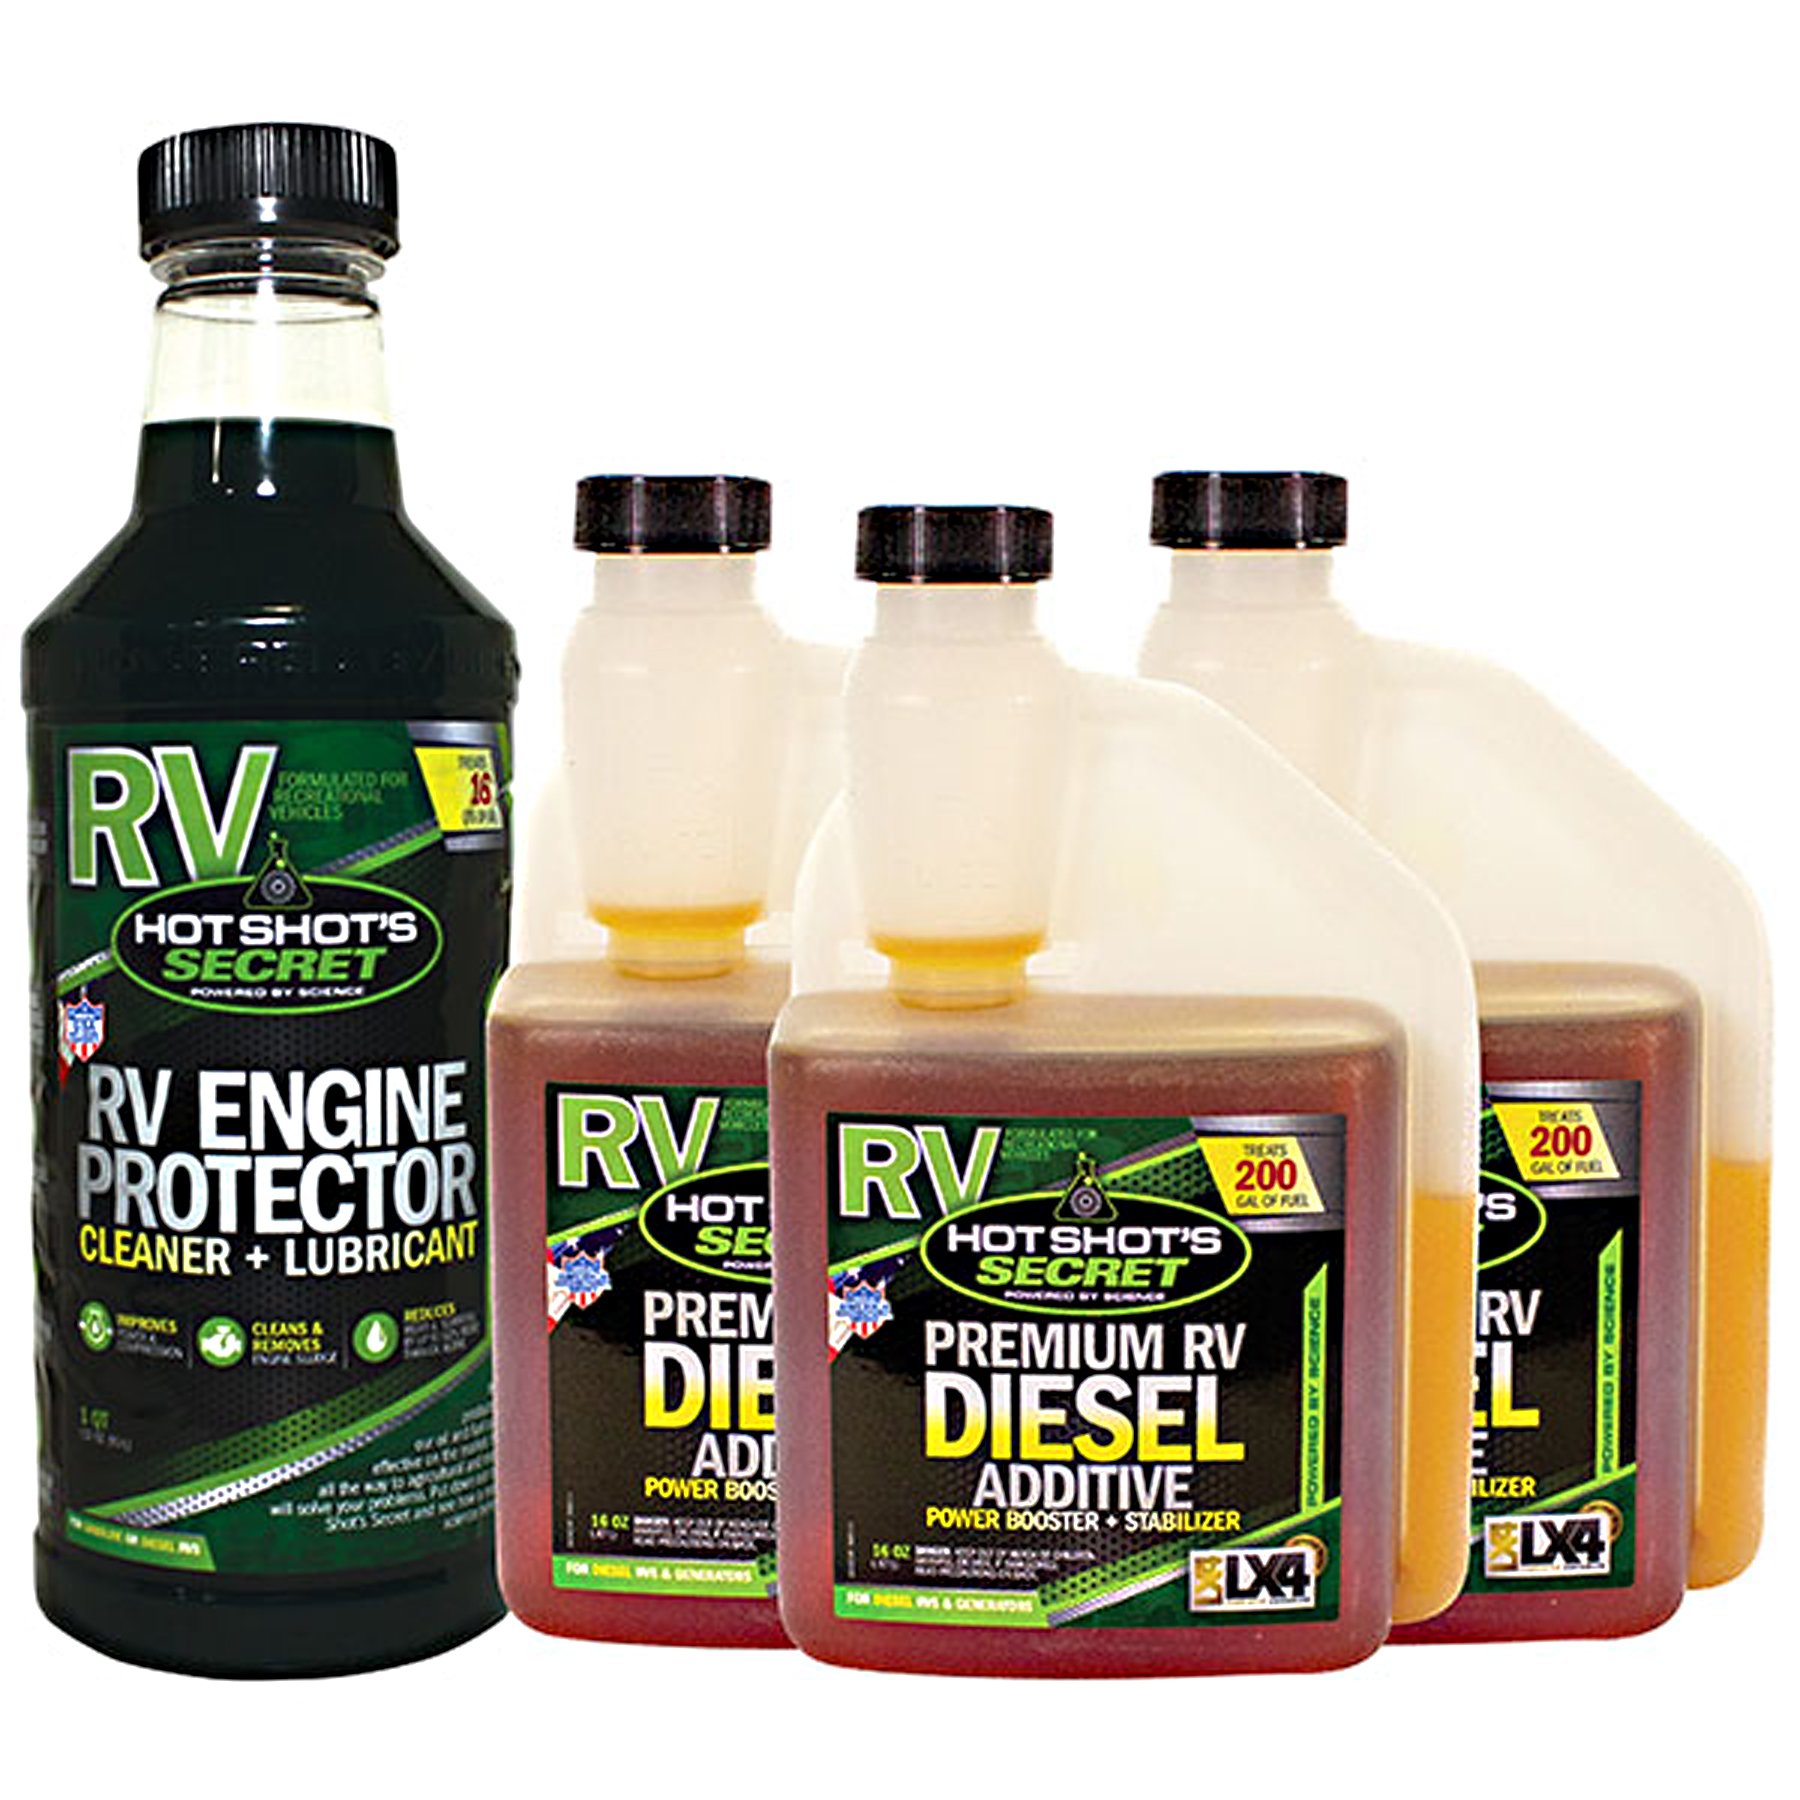 Is Your Diesel-Powered RV Ready For Summer